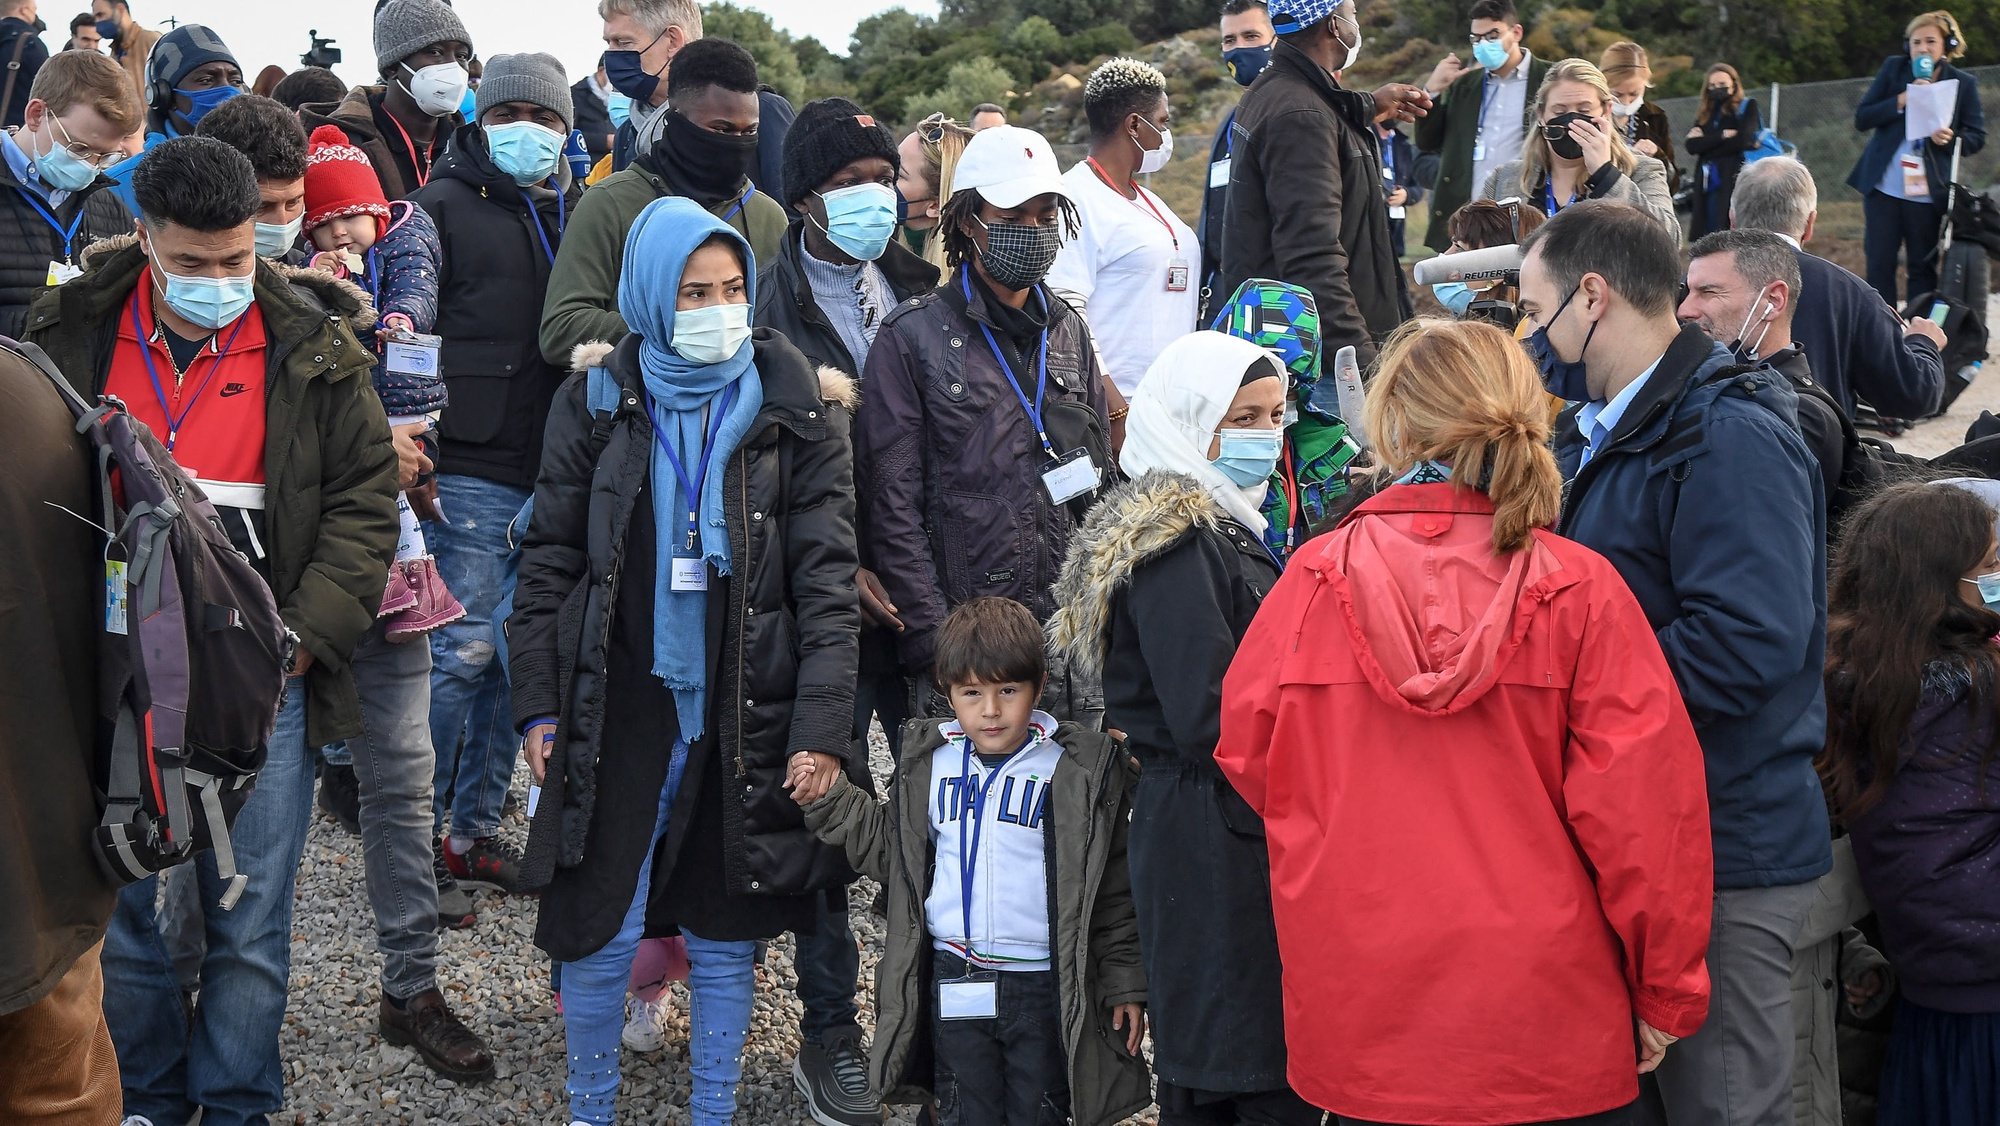 epa09623253 People gather at the Reception and Identification Centre (RIC) in Mytilene on the island of Lesbos, Greece, 05 December 2021. Pope Francis returned to the island of Lesbos, the migration flashpoint he first visited in 2016, to plead for better treatment of refugees as attitudes towards migrants harden across Europe.  EPA/ALESSANDRO DI MEO